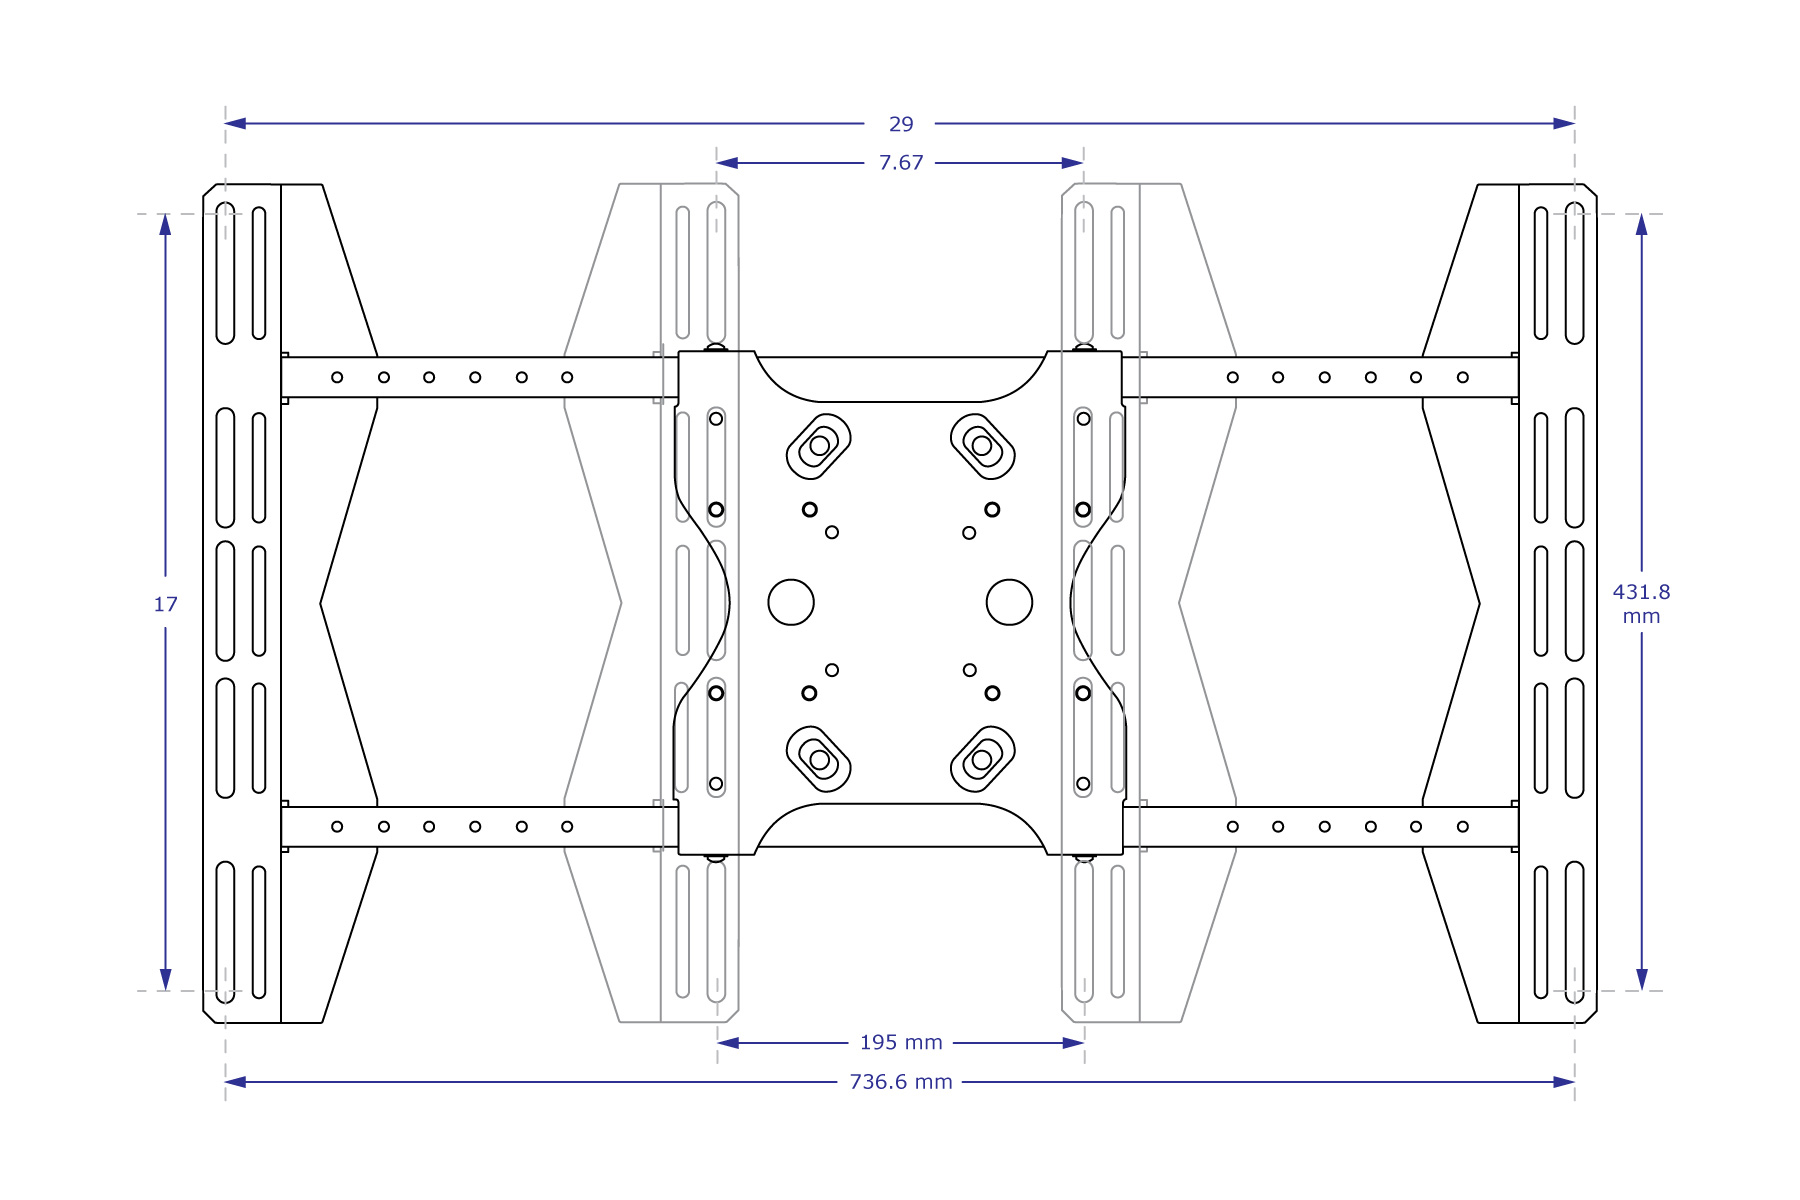 MSU4x6 large VESA adapter specification drawing front view shown at maximum and minimum widths with measurements